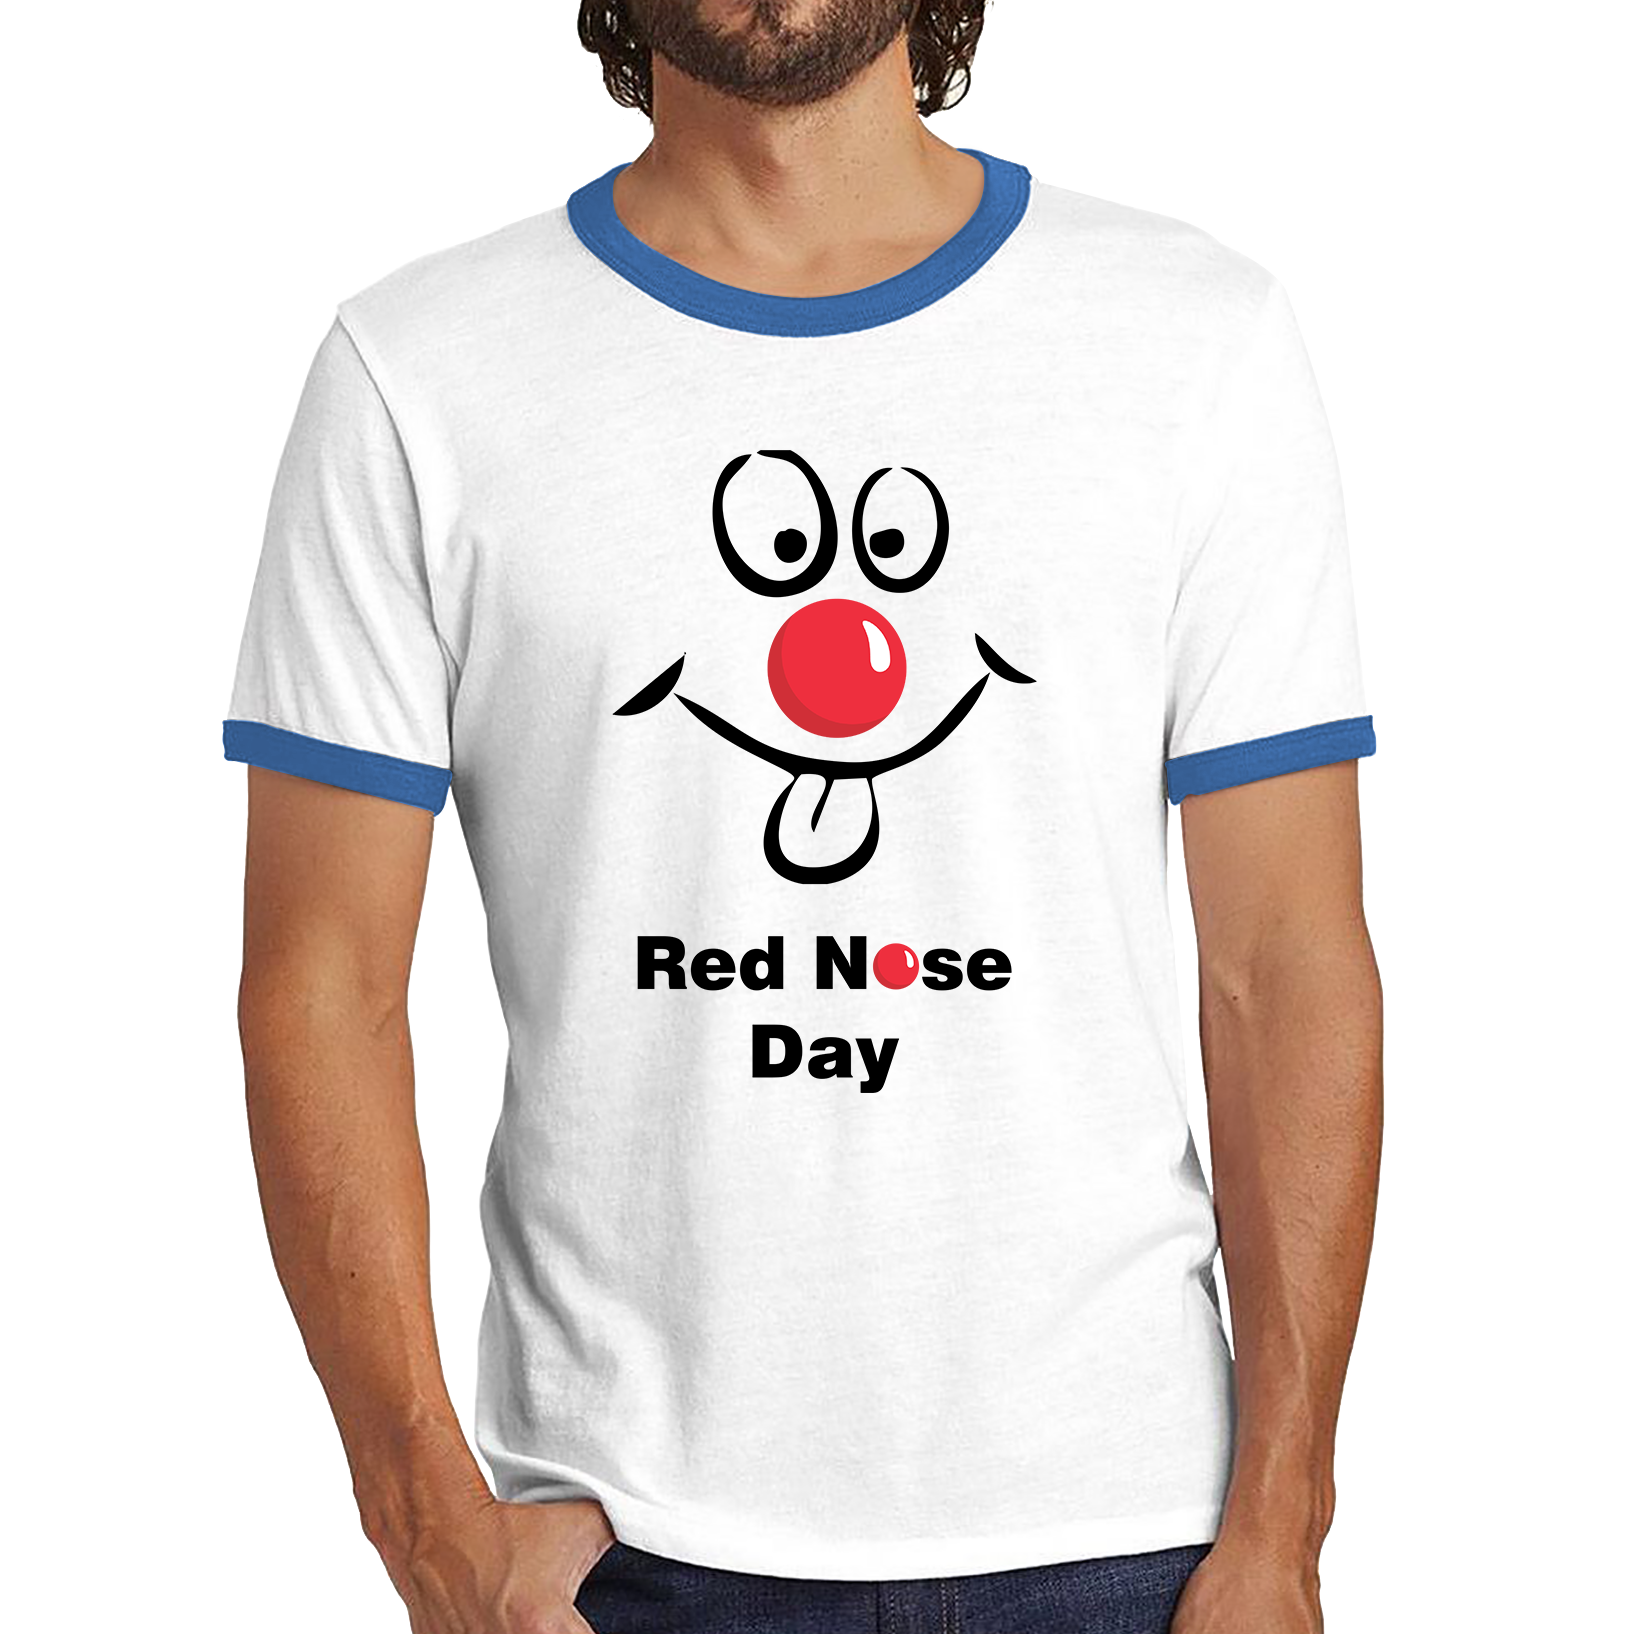 Funny Emoji Face Red Nose Day Ringer T Shirt. 50% Goes To Charity